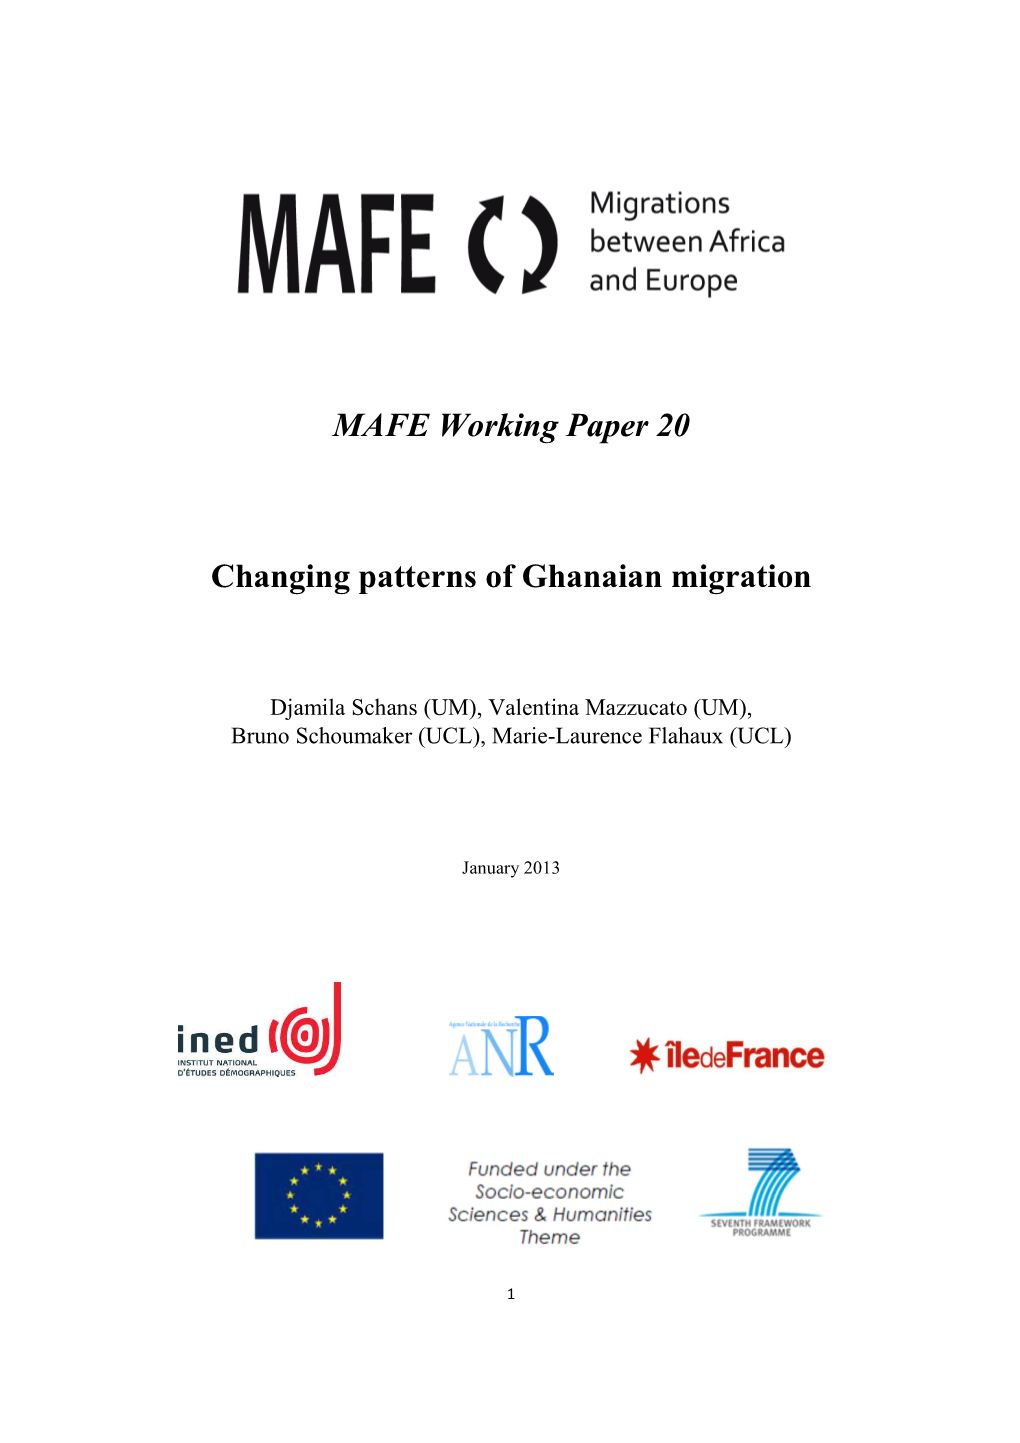 MAFE Working Paper 20 Changing Patterns of Ghanaian Migration